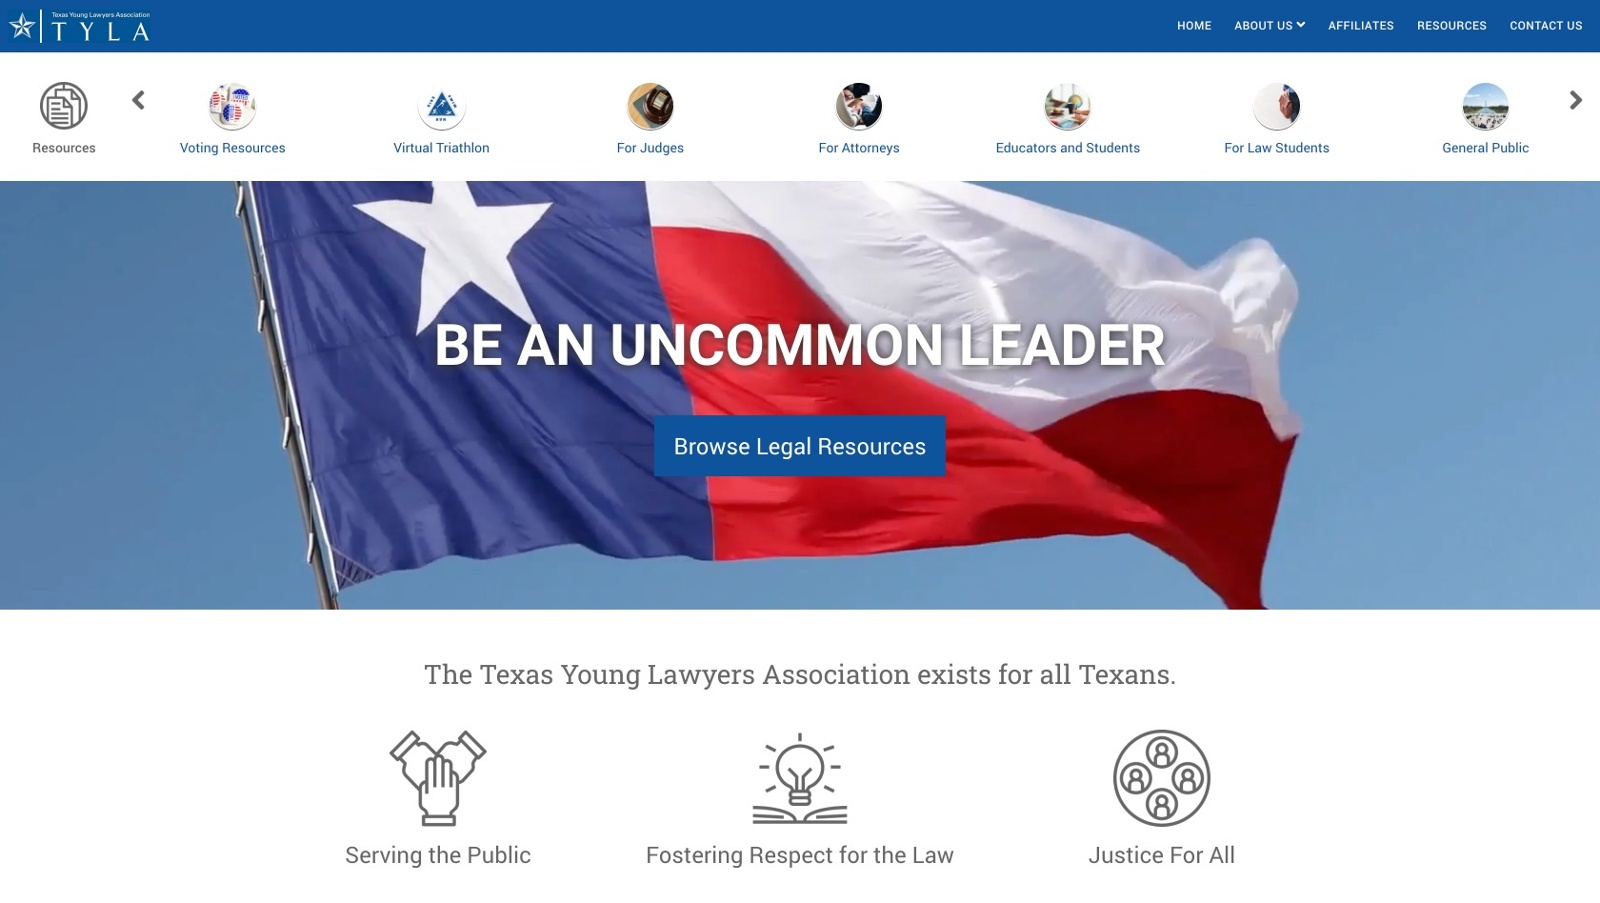 Texas Young Lawyers Association